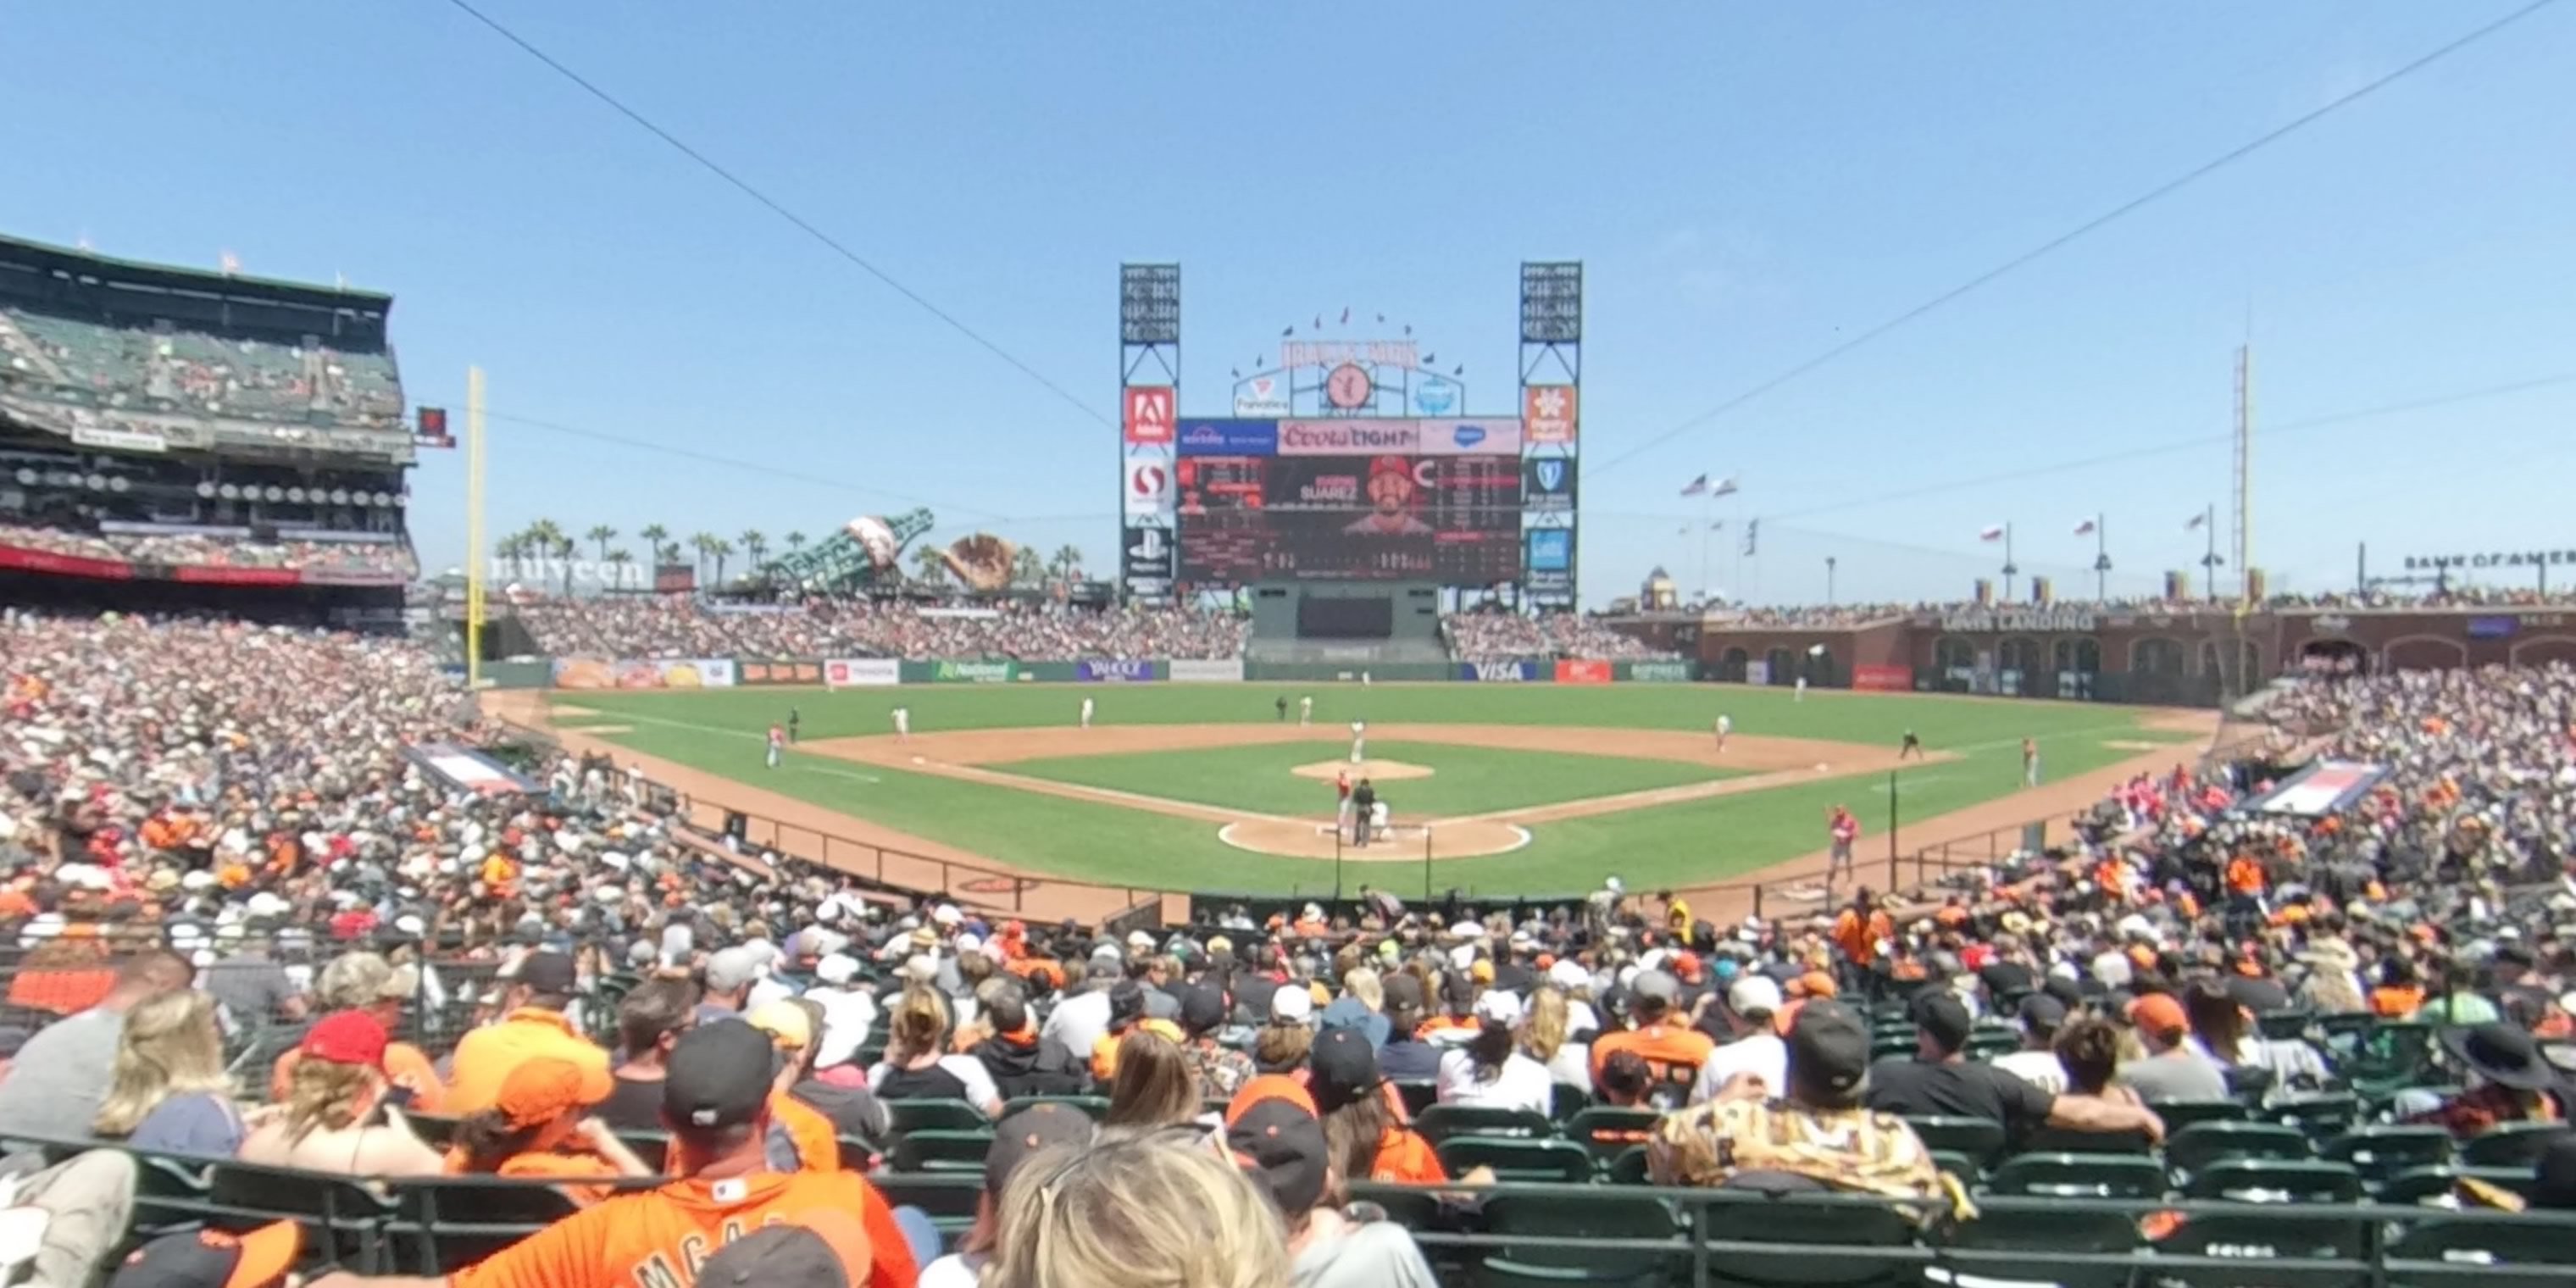 section 115 panoramic seat view  for baseball - oracle park